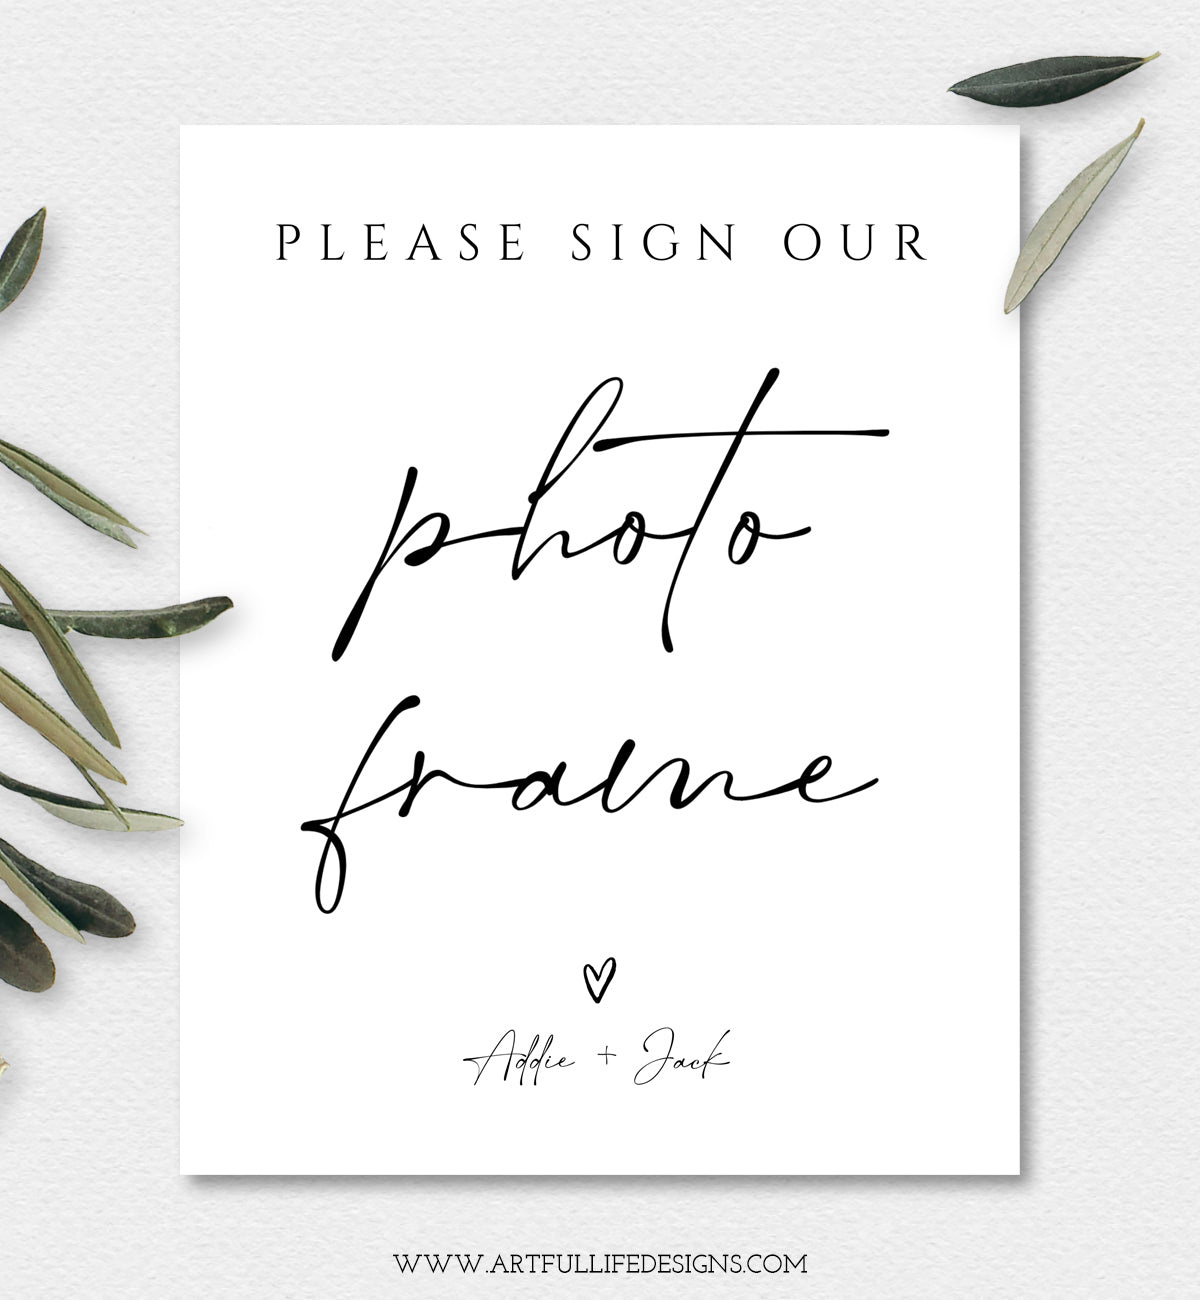 please sign our photo frame sign